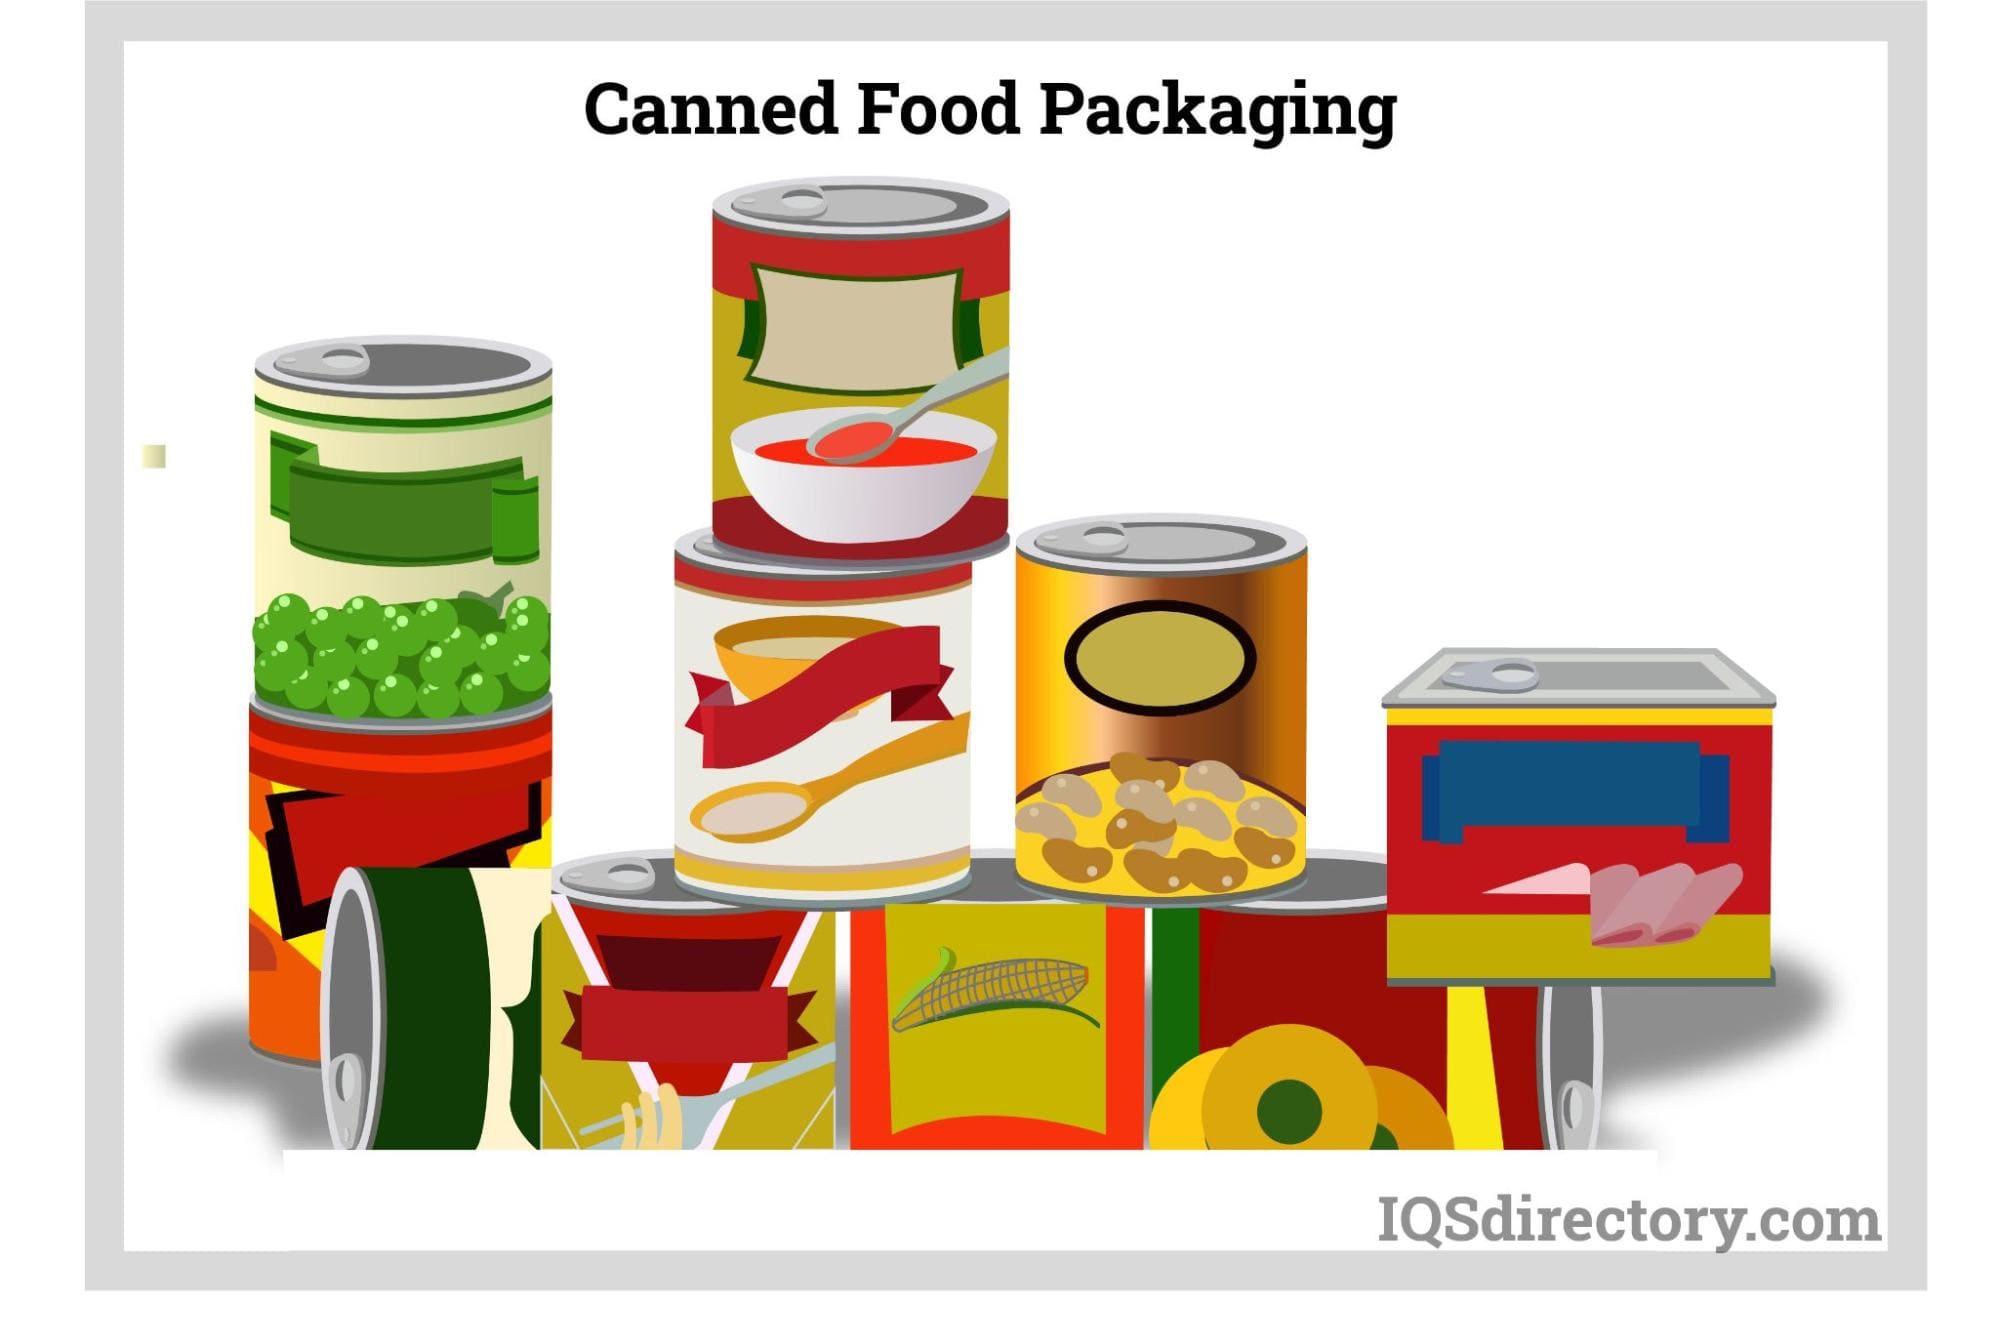 Canned Food Packaging